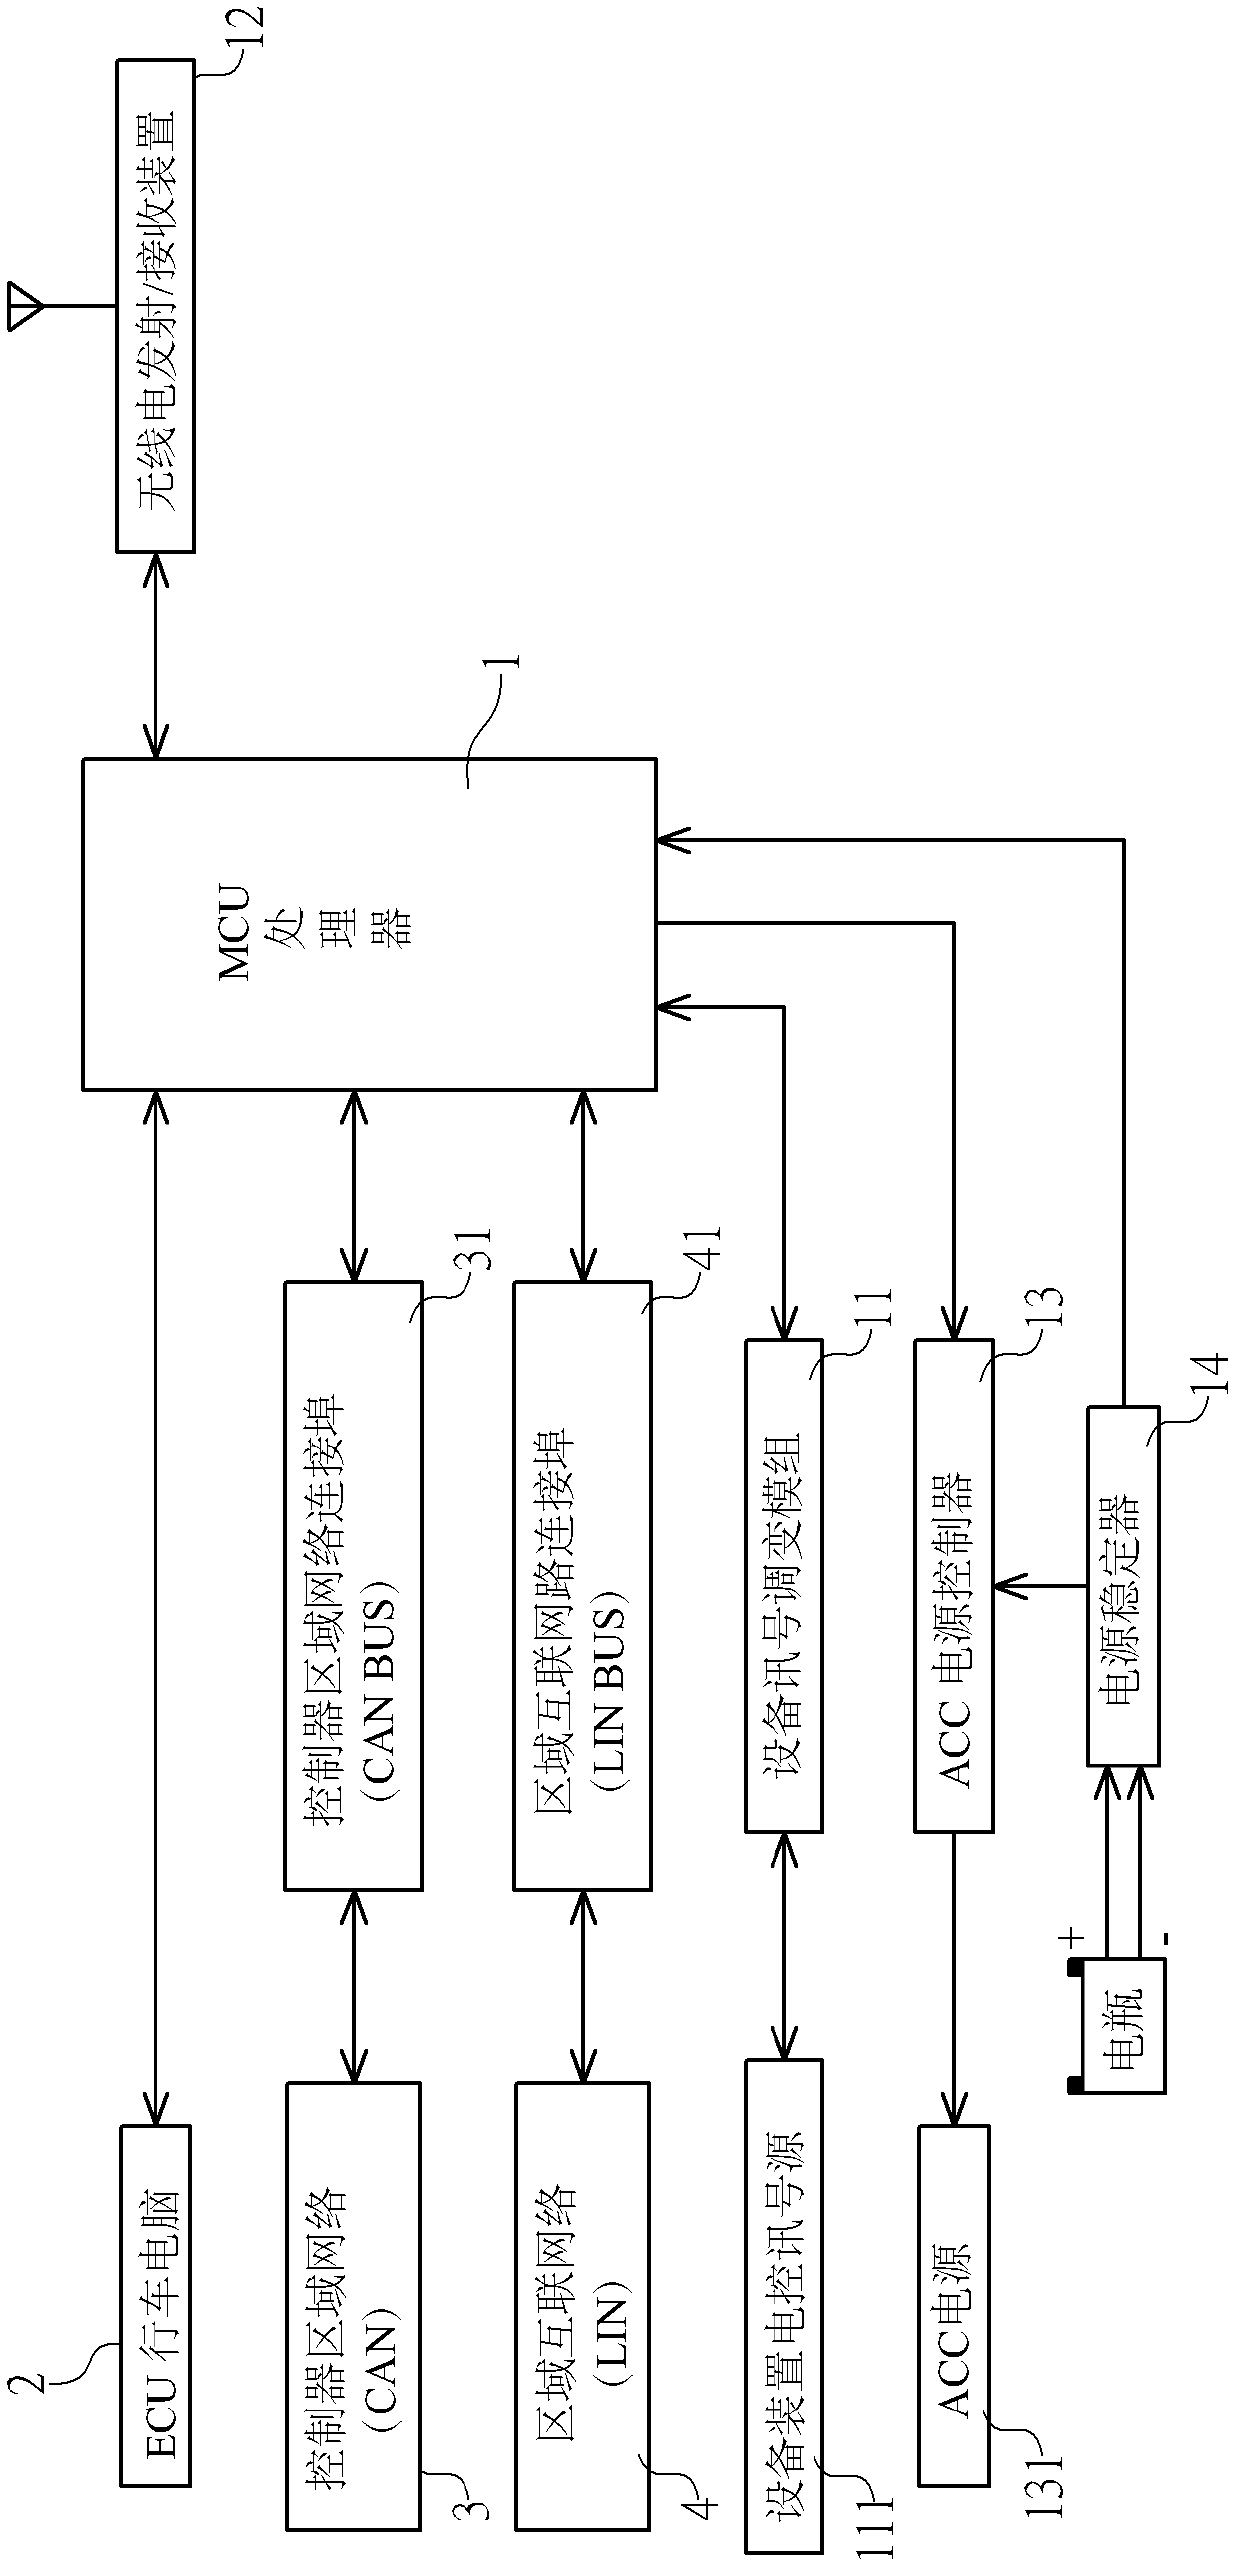 Driving information notification system